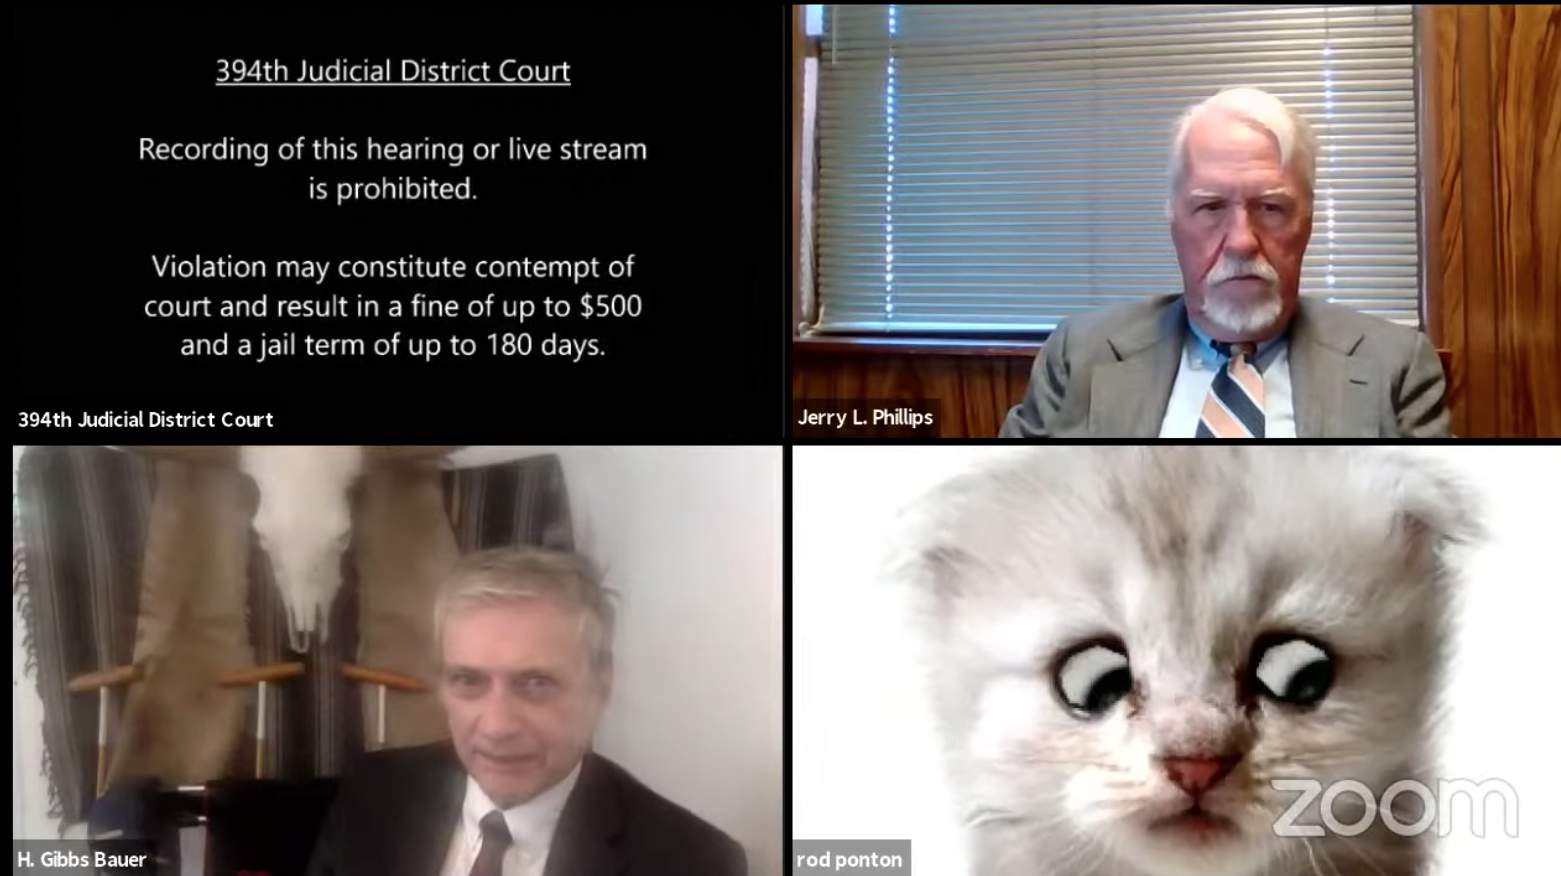 ‘I’m not a cat,’ lawyer tells judge during Zoom call cat-filter faux ‘paw’